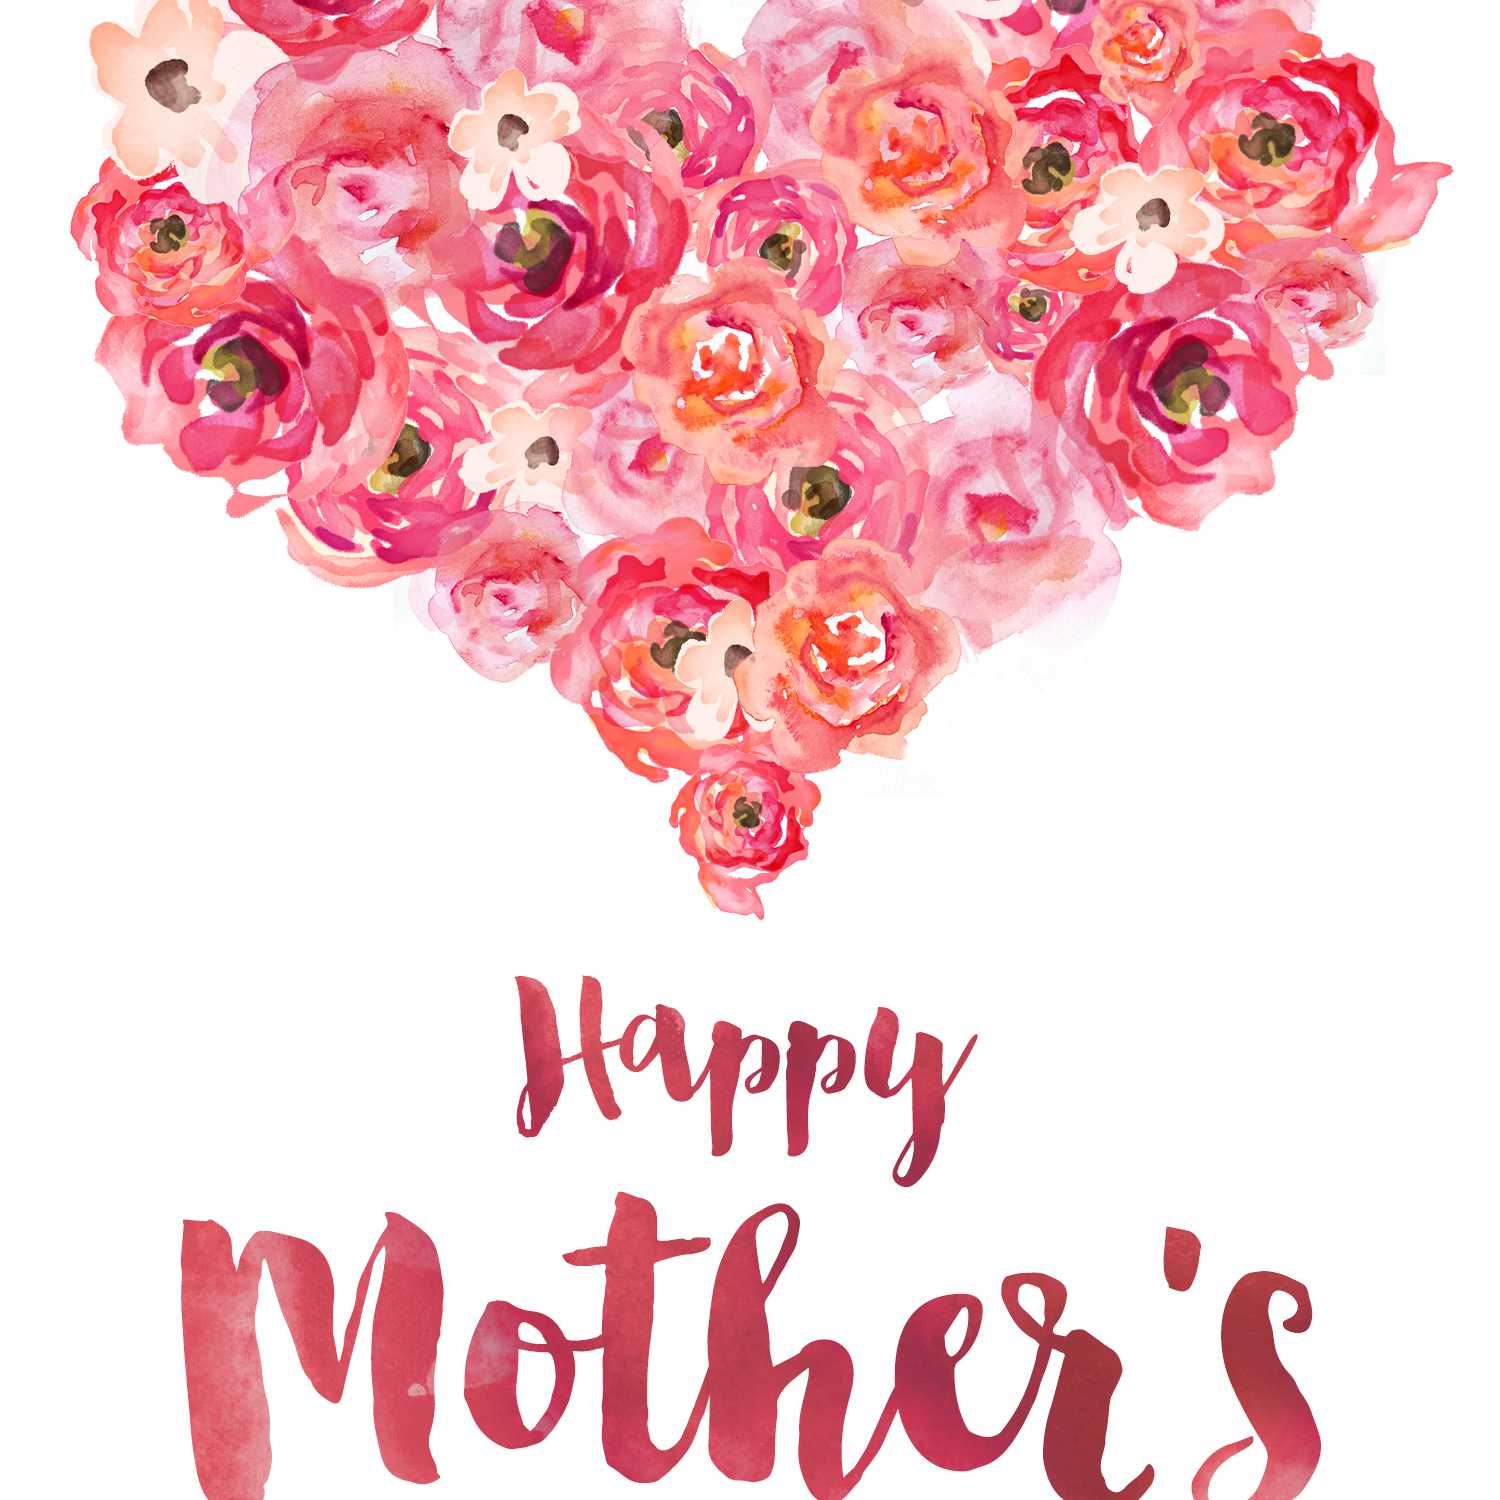 77 Format Mother S Day Card Free Design Formating for Mother S Day Card Free Design